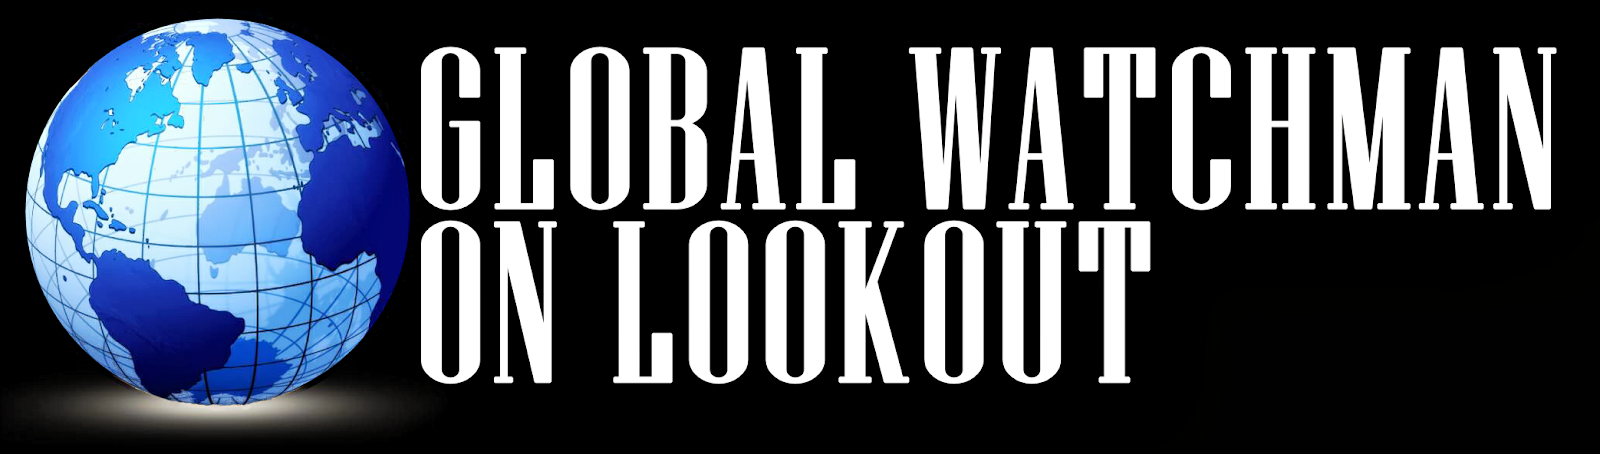 GLOBALWATCHMAN ON THE LOOKOUT